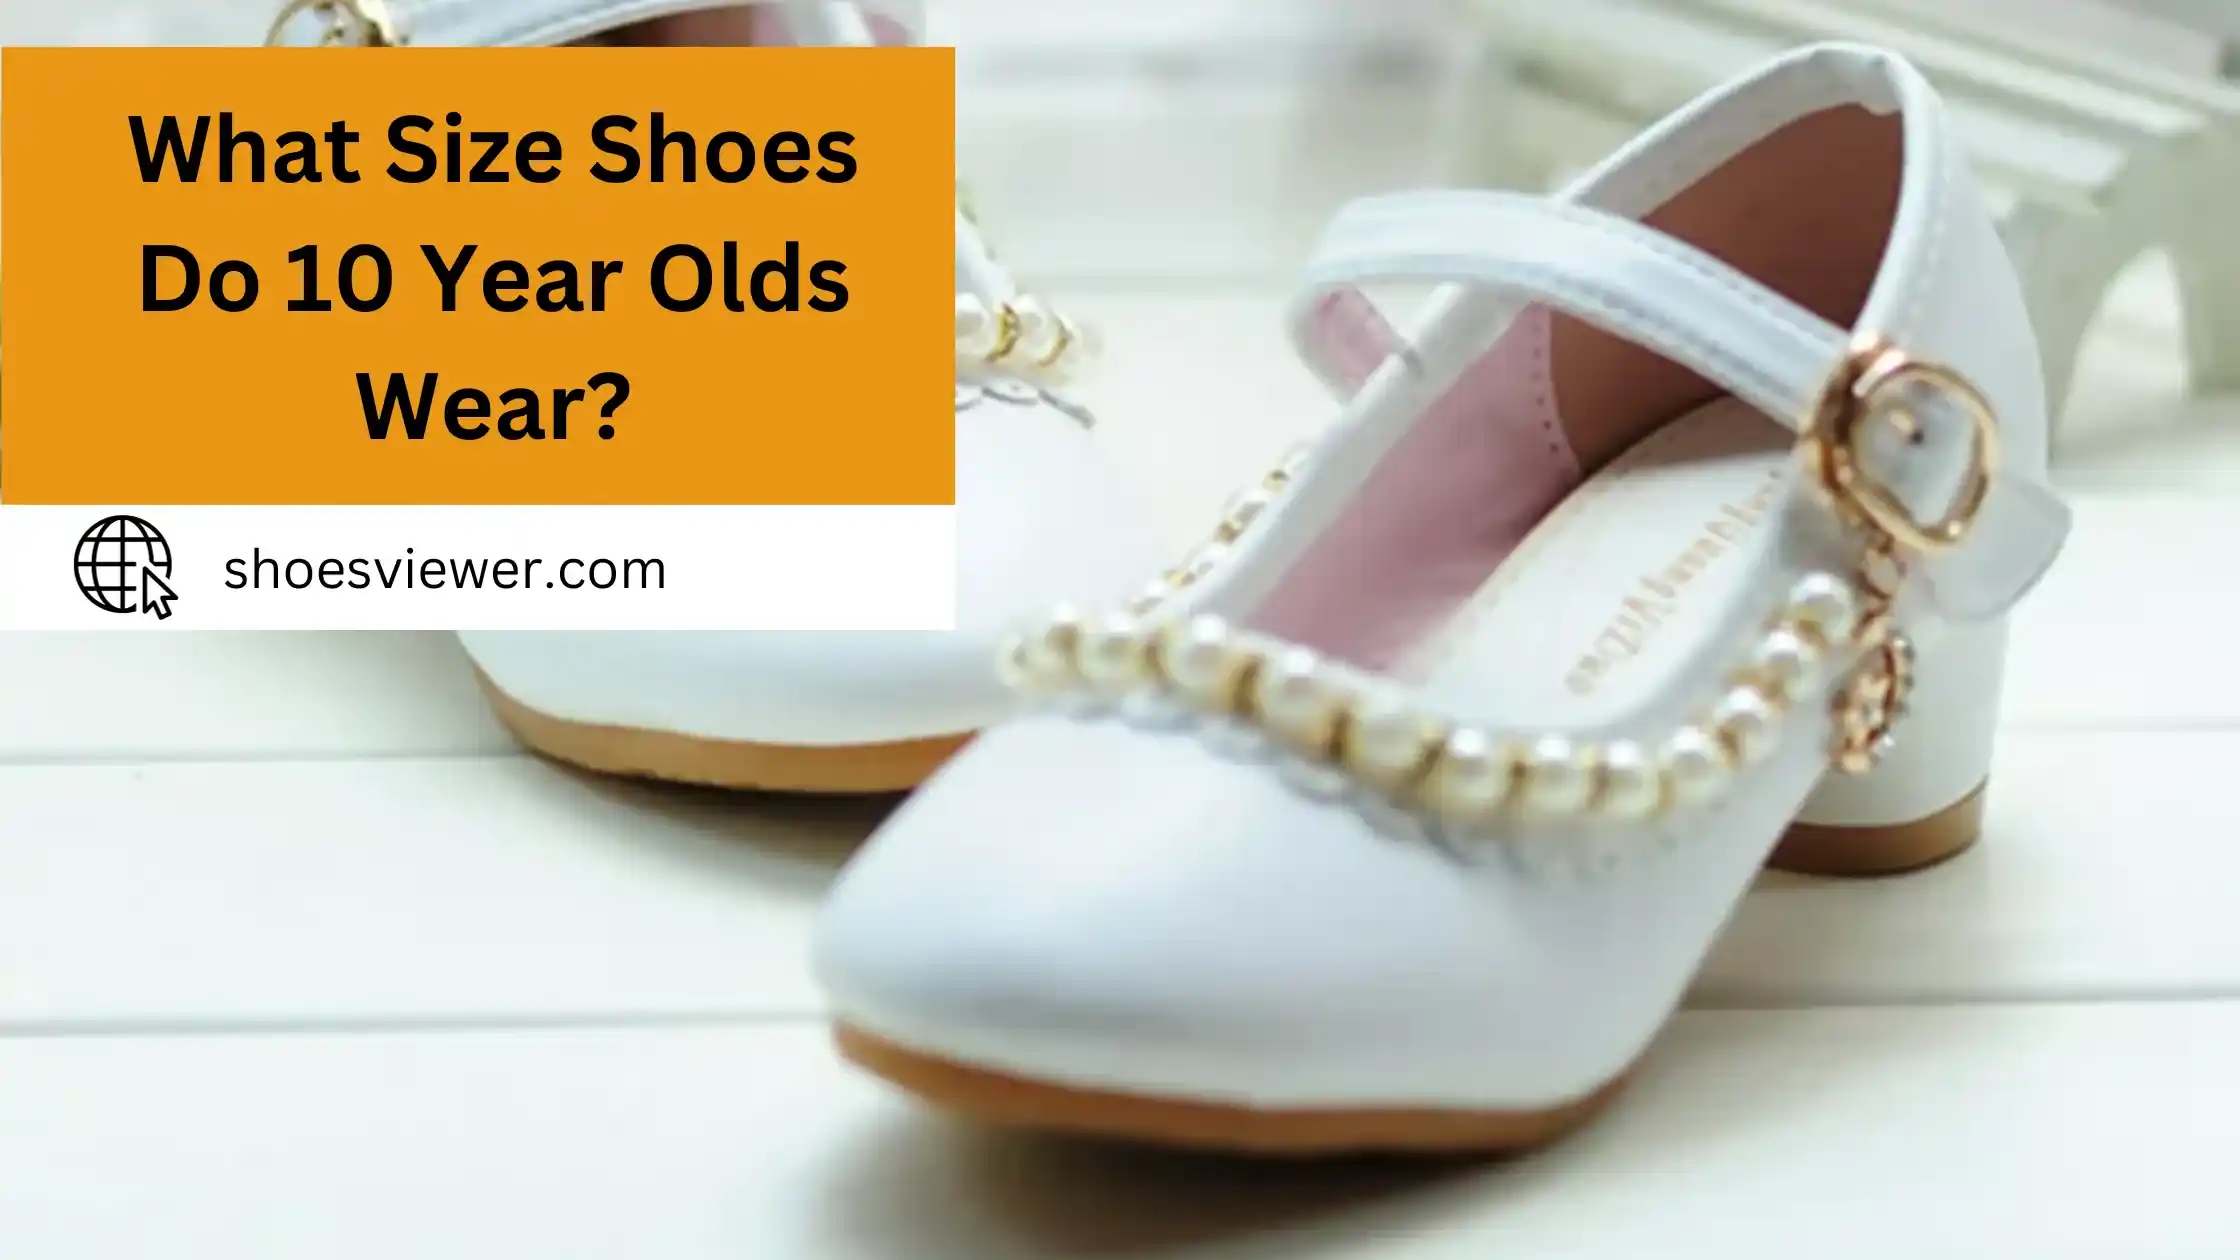 What Size Shoes Do 10 Year Olds Wear? (An In-Depth Guide)